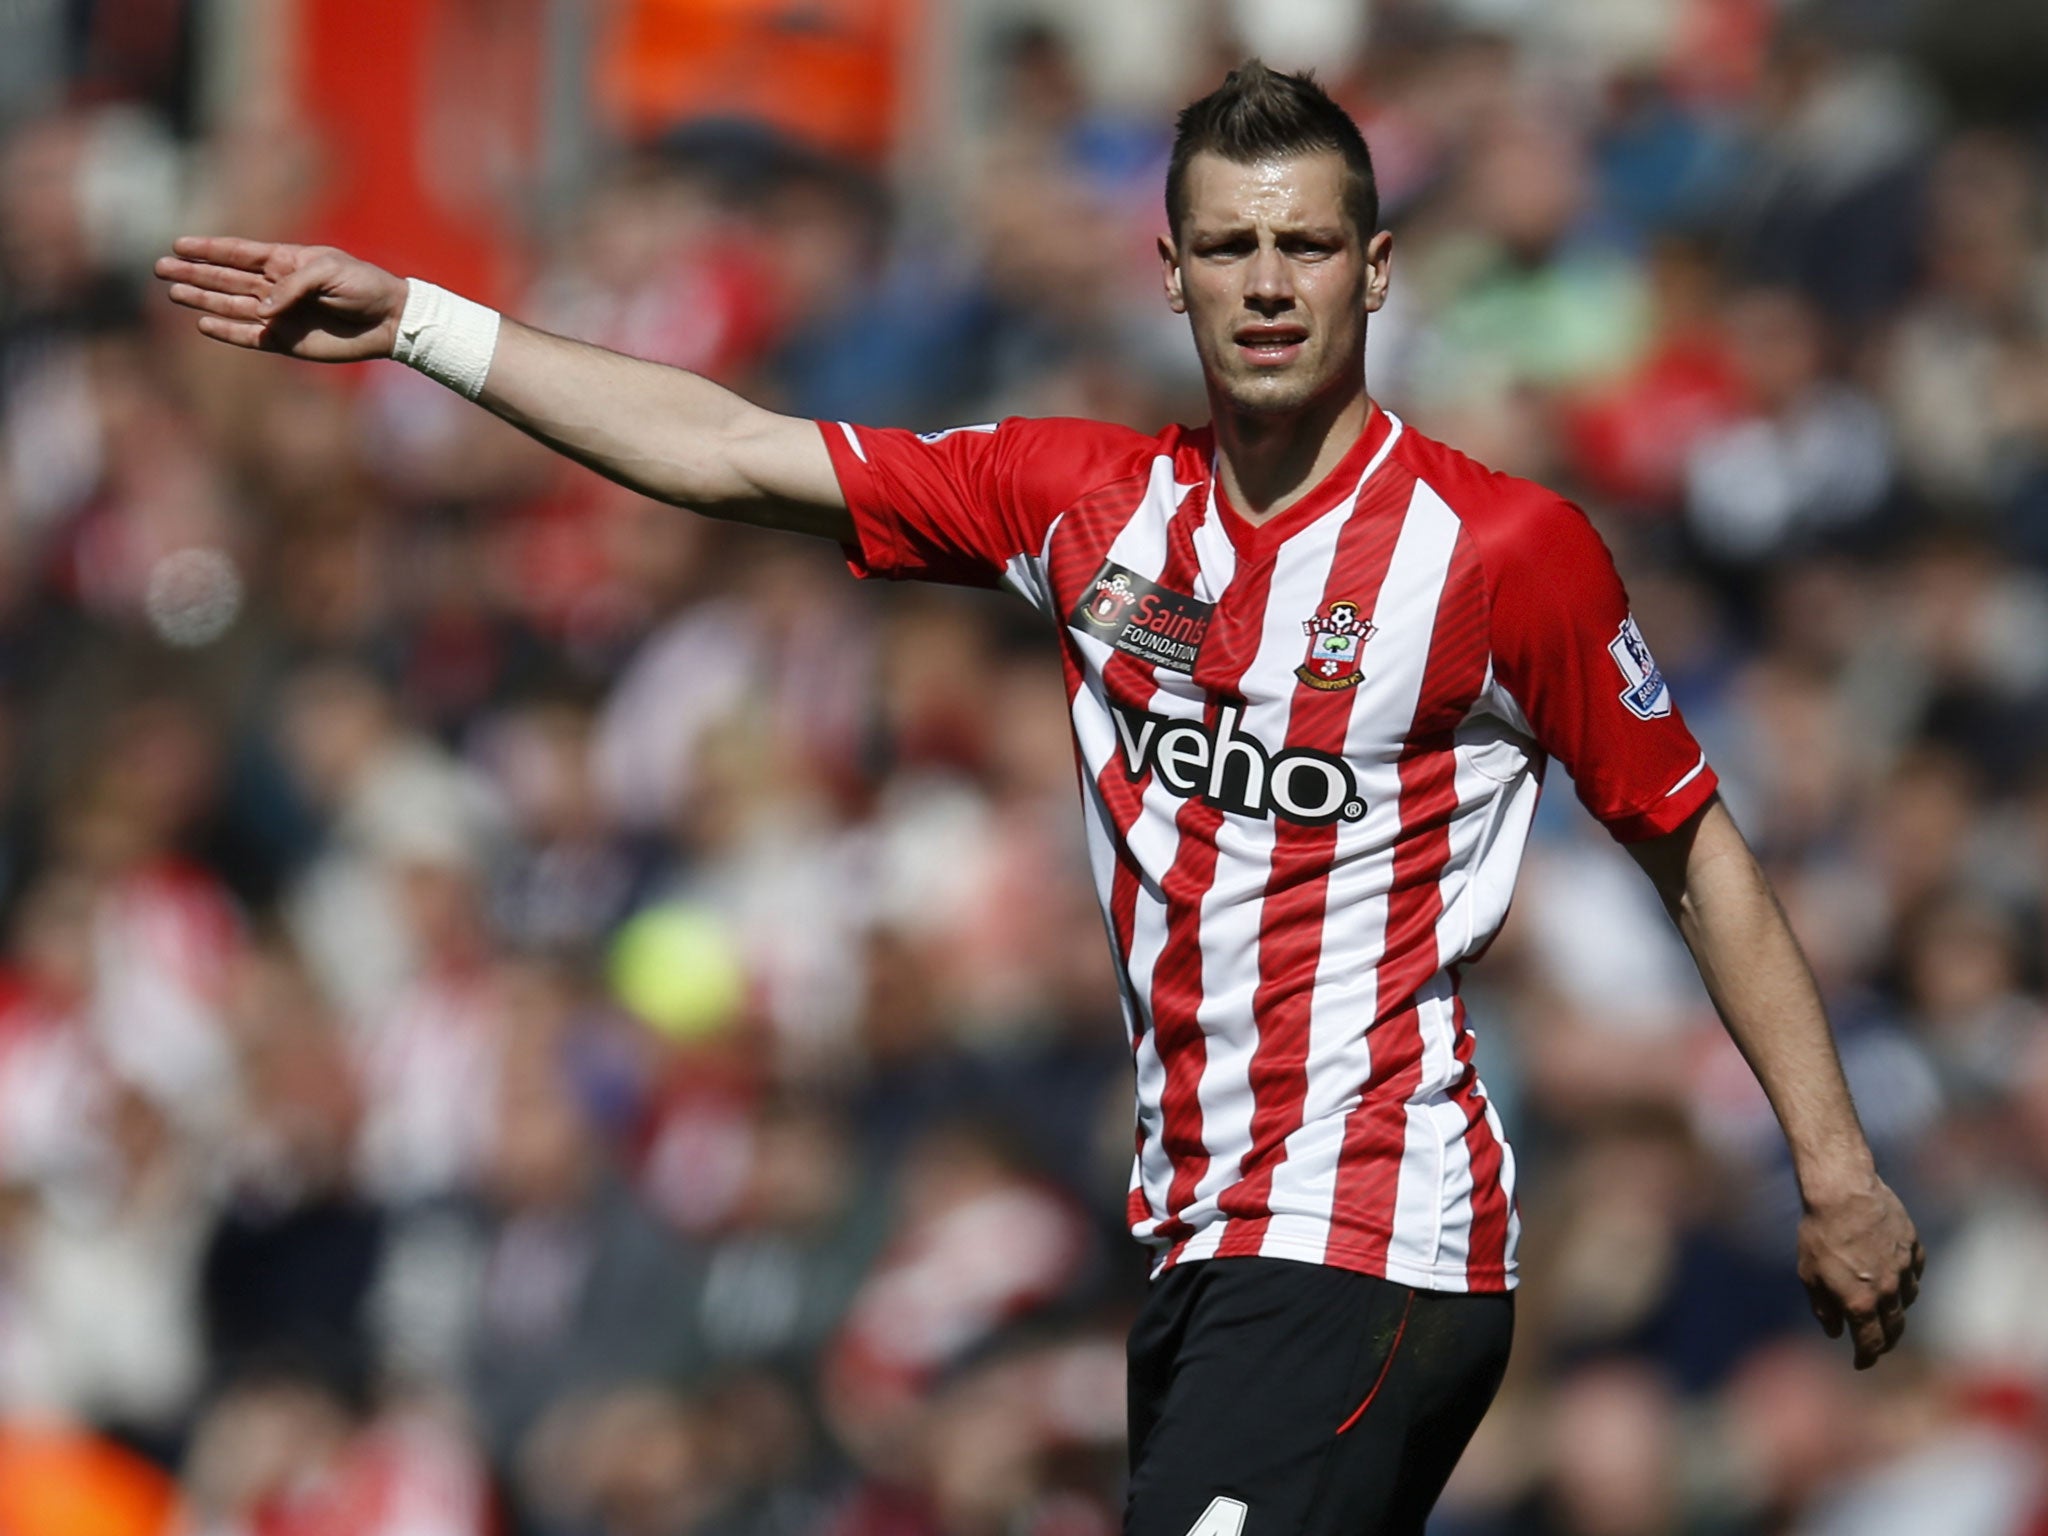 Morgan Schneiderlin is set to move to Manchester United